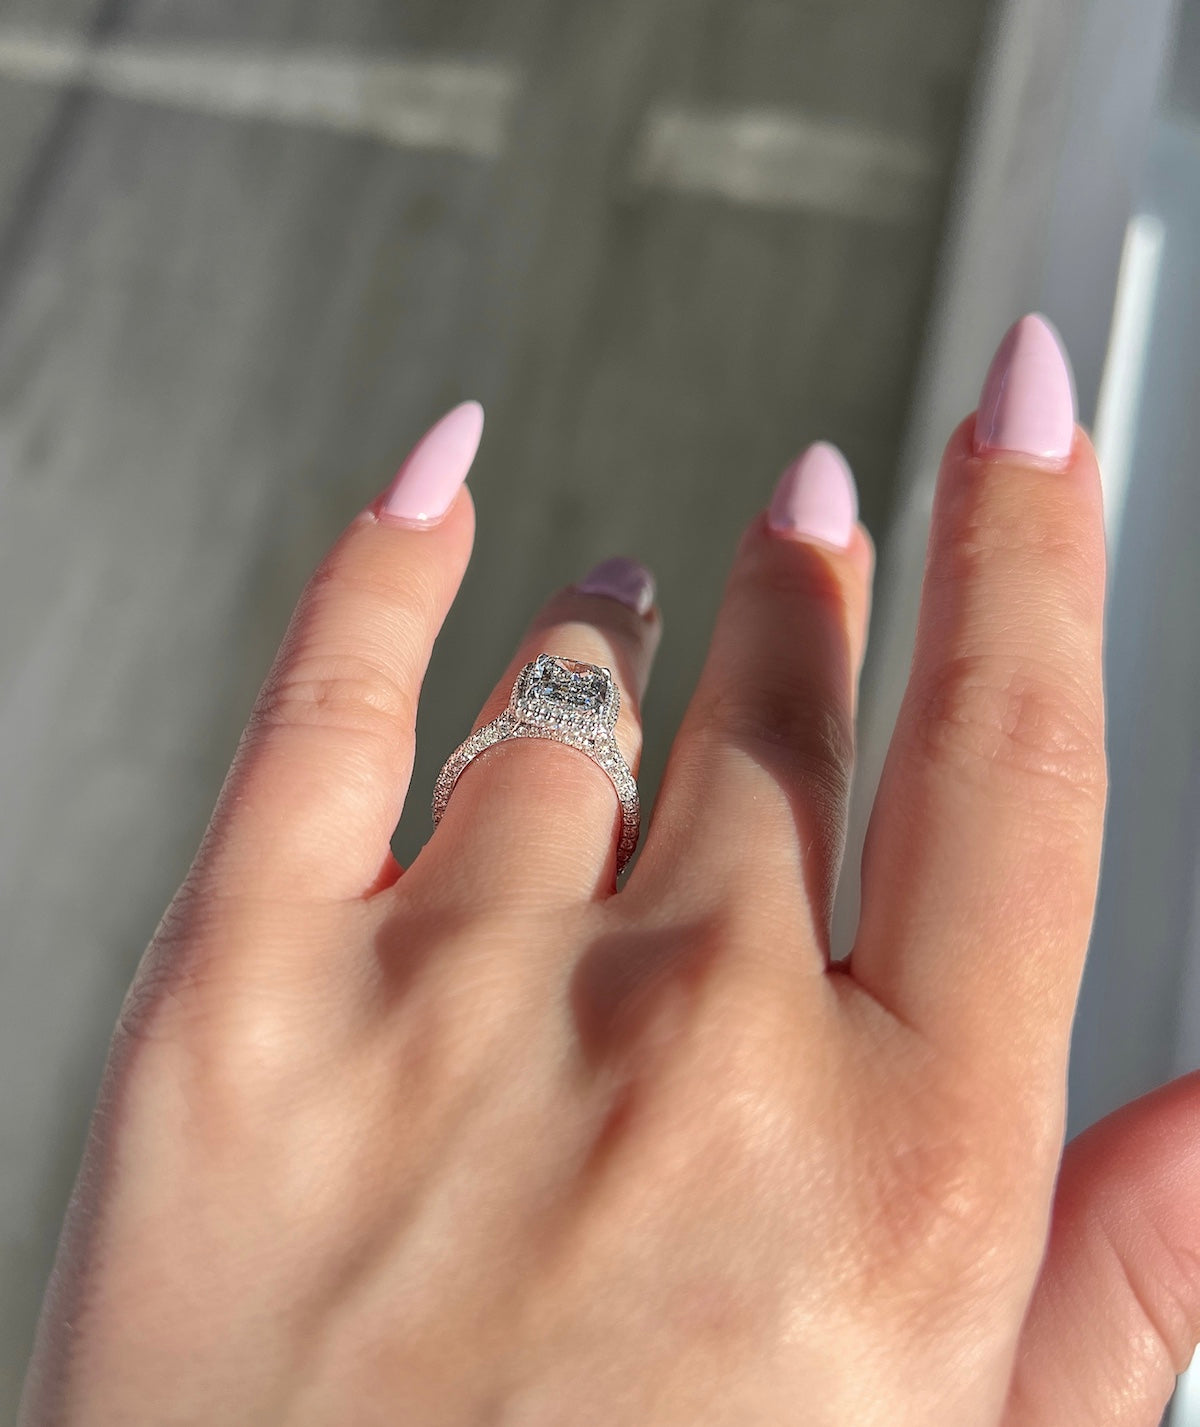 Load image into Gallery viewer, Engagement Ring Wednesday | 2.03 Radiant Cut Lab Created Diamond - Happy Jewelers Fine Jewelry Lifetime Warranty
